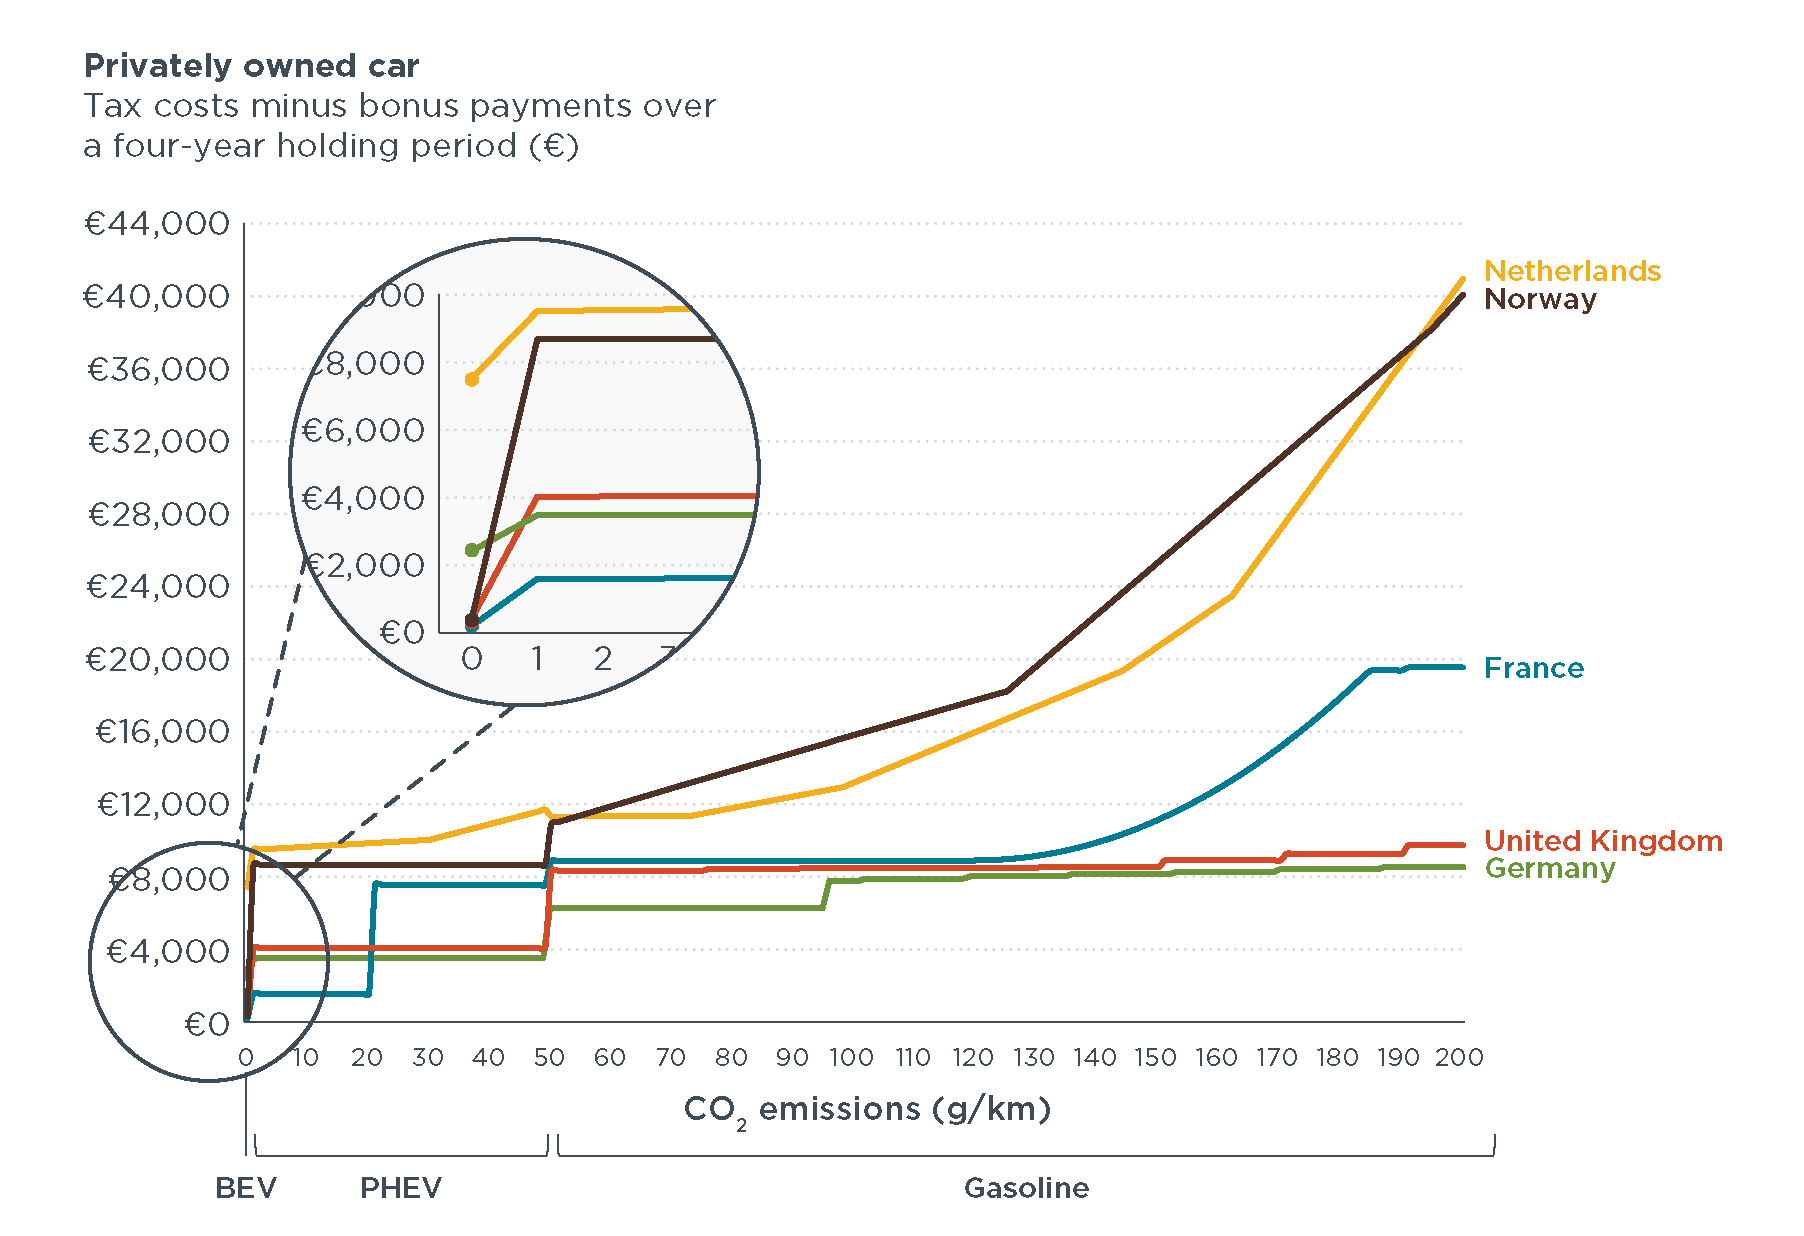 EU vehicle tax and CO2 reductions